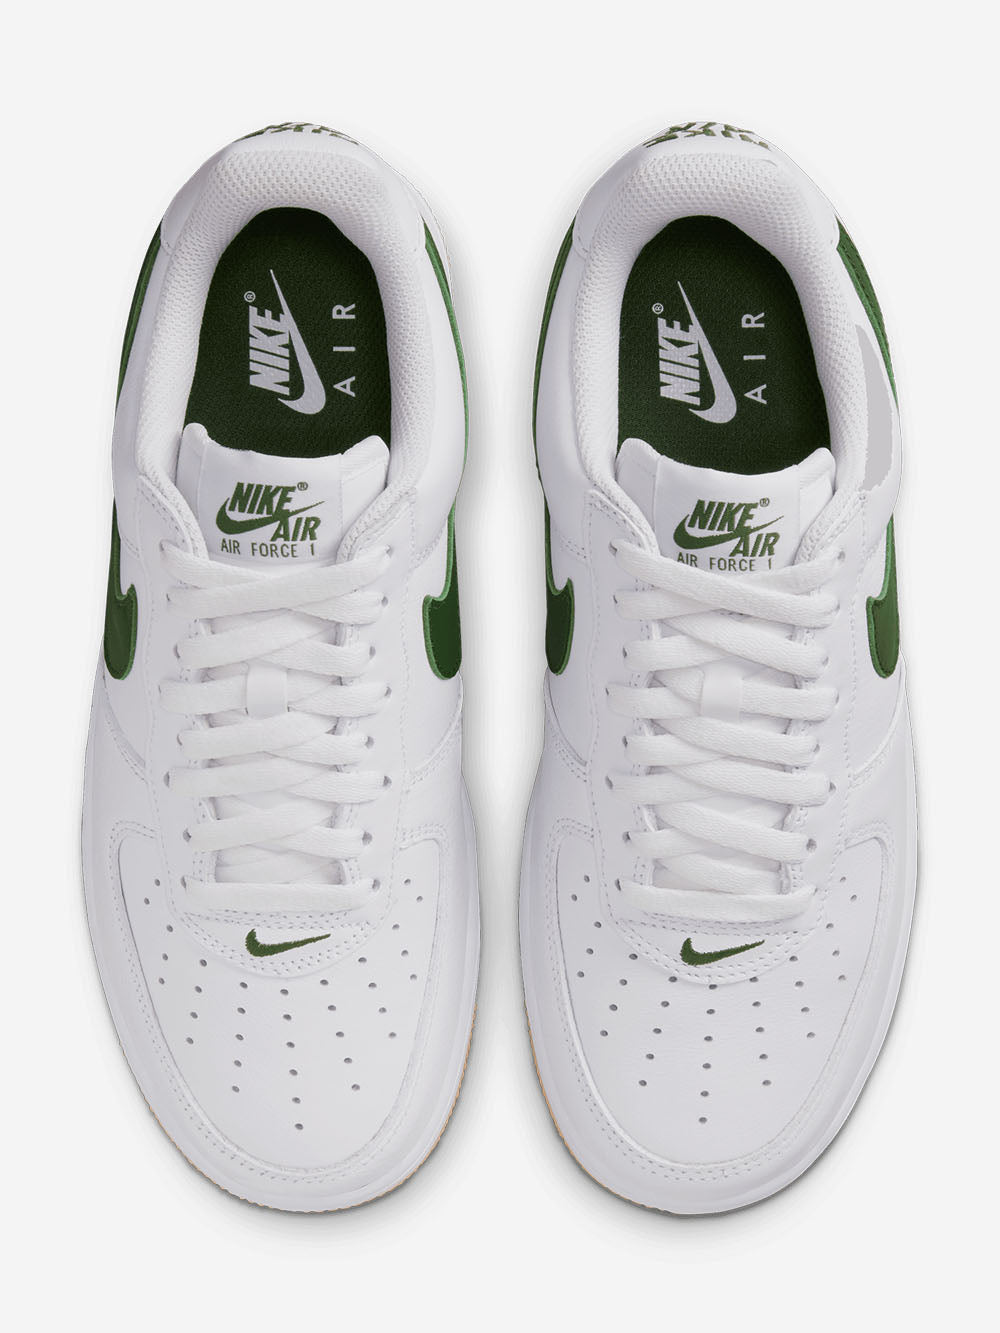 NIKE Air Force 1 Low Retro "Color of the month Forest Green" Sneakers Verde Urbanstaroma